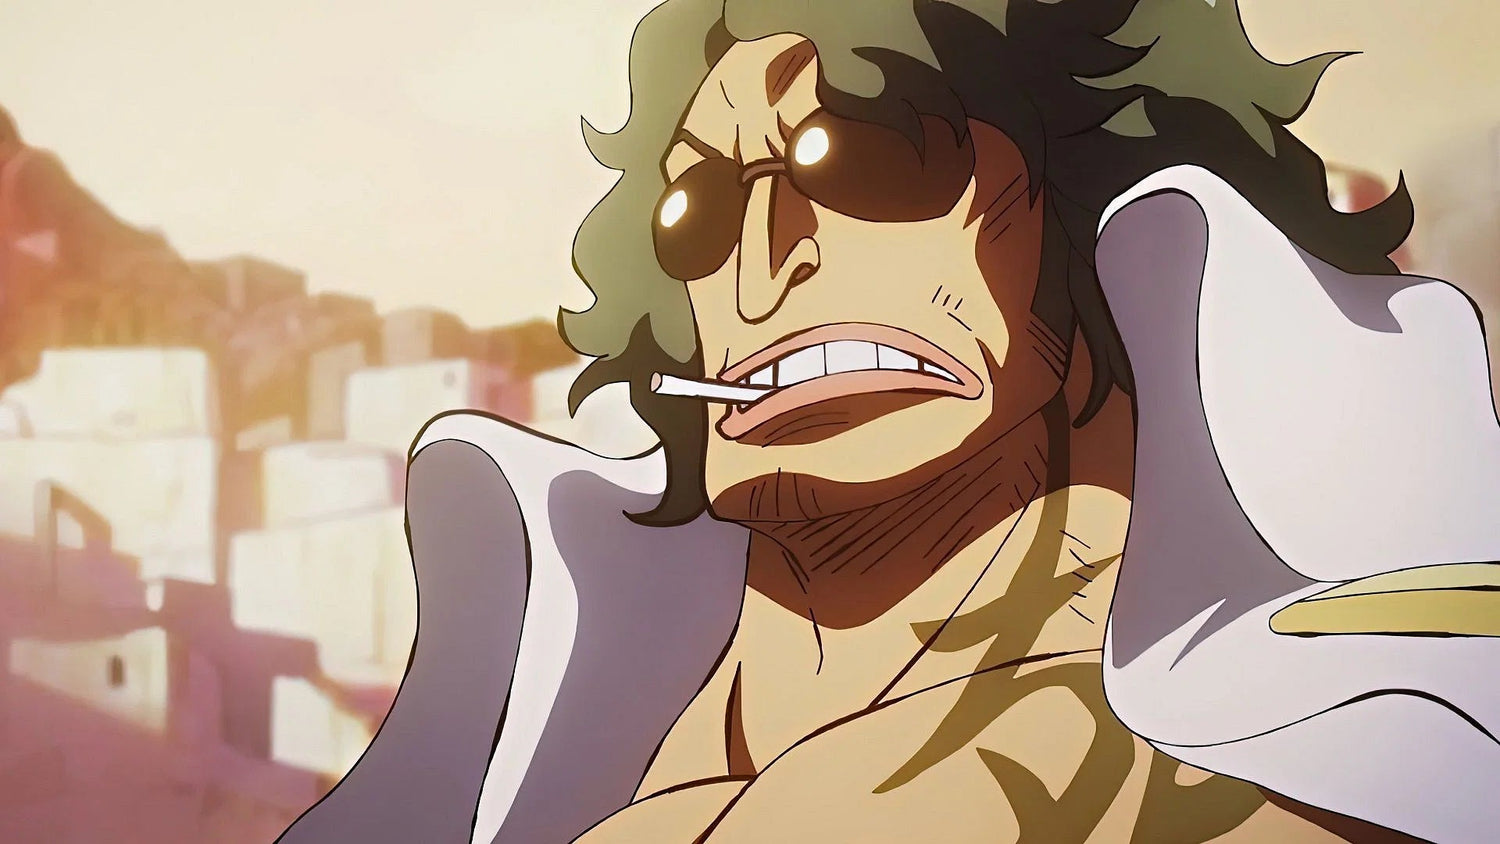 Green Bull in One Piece: The Powerful Admiral Ryokugyu and His Confrontation with Shanks - Seakoff